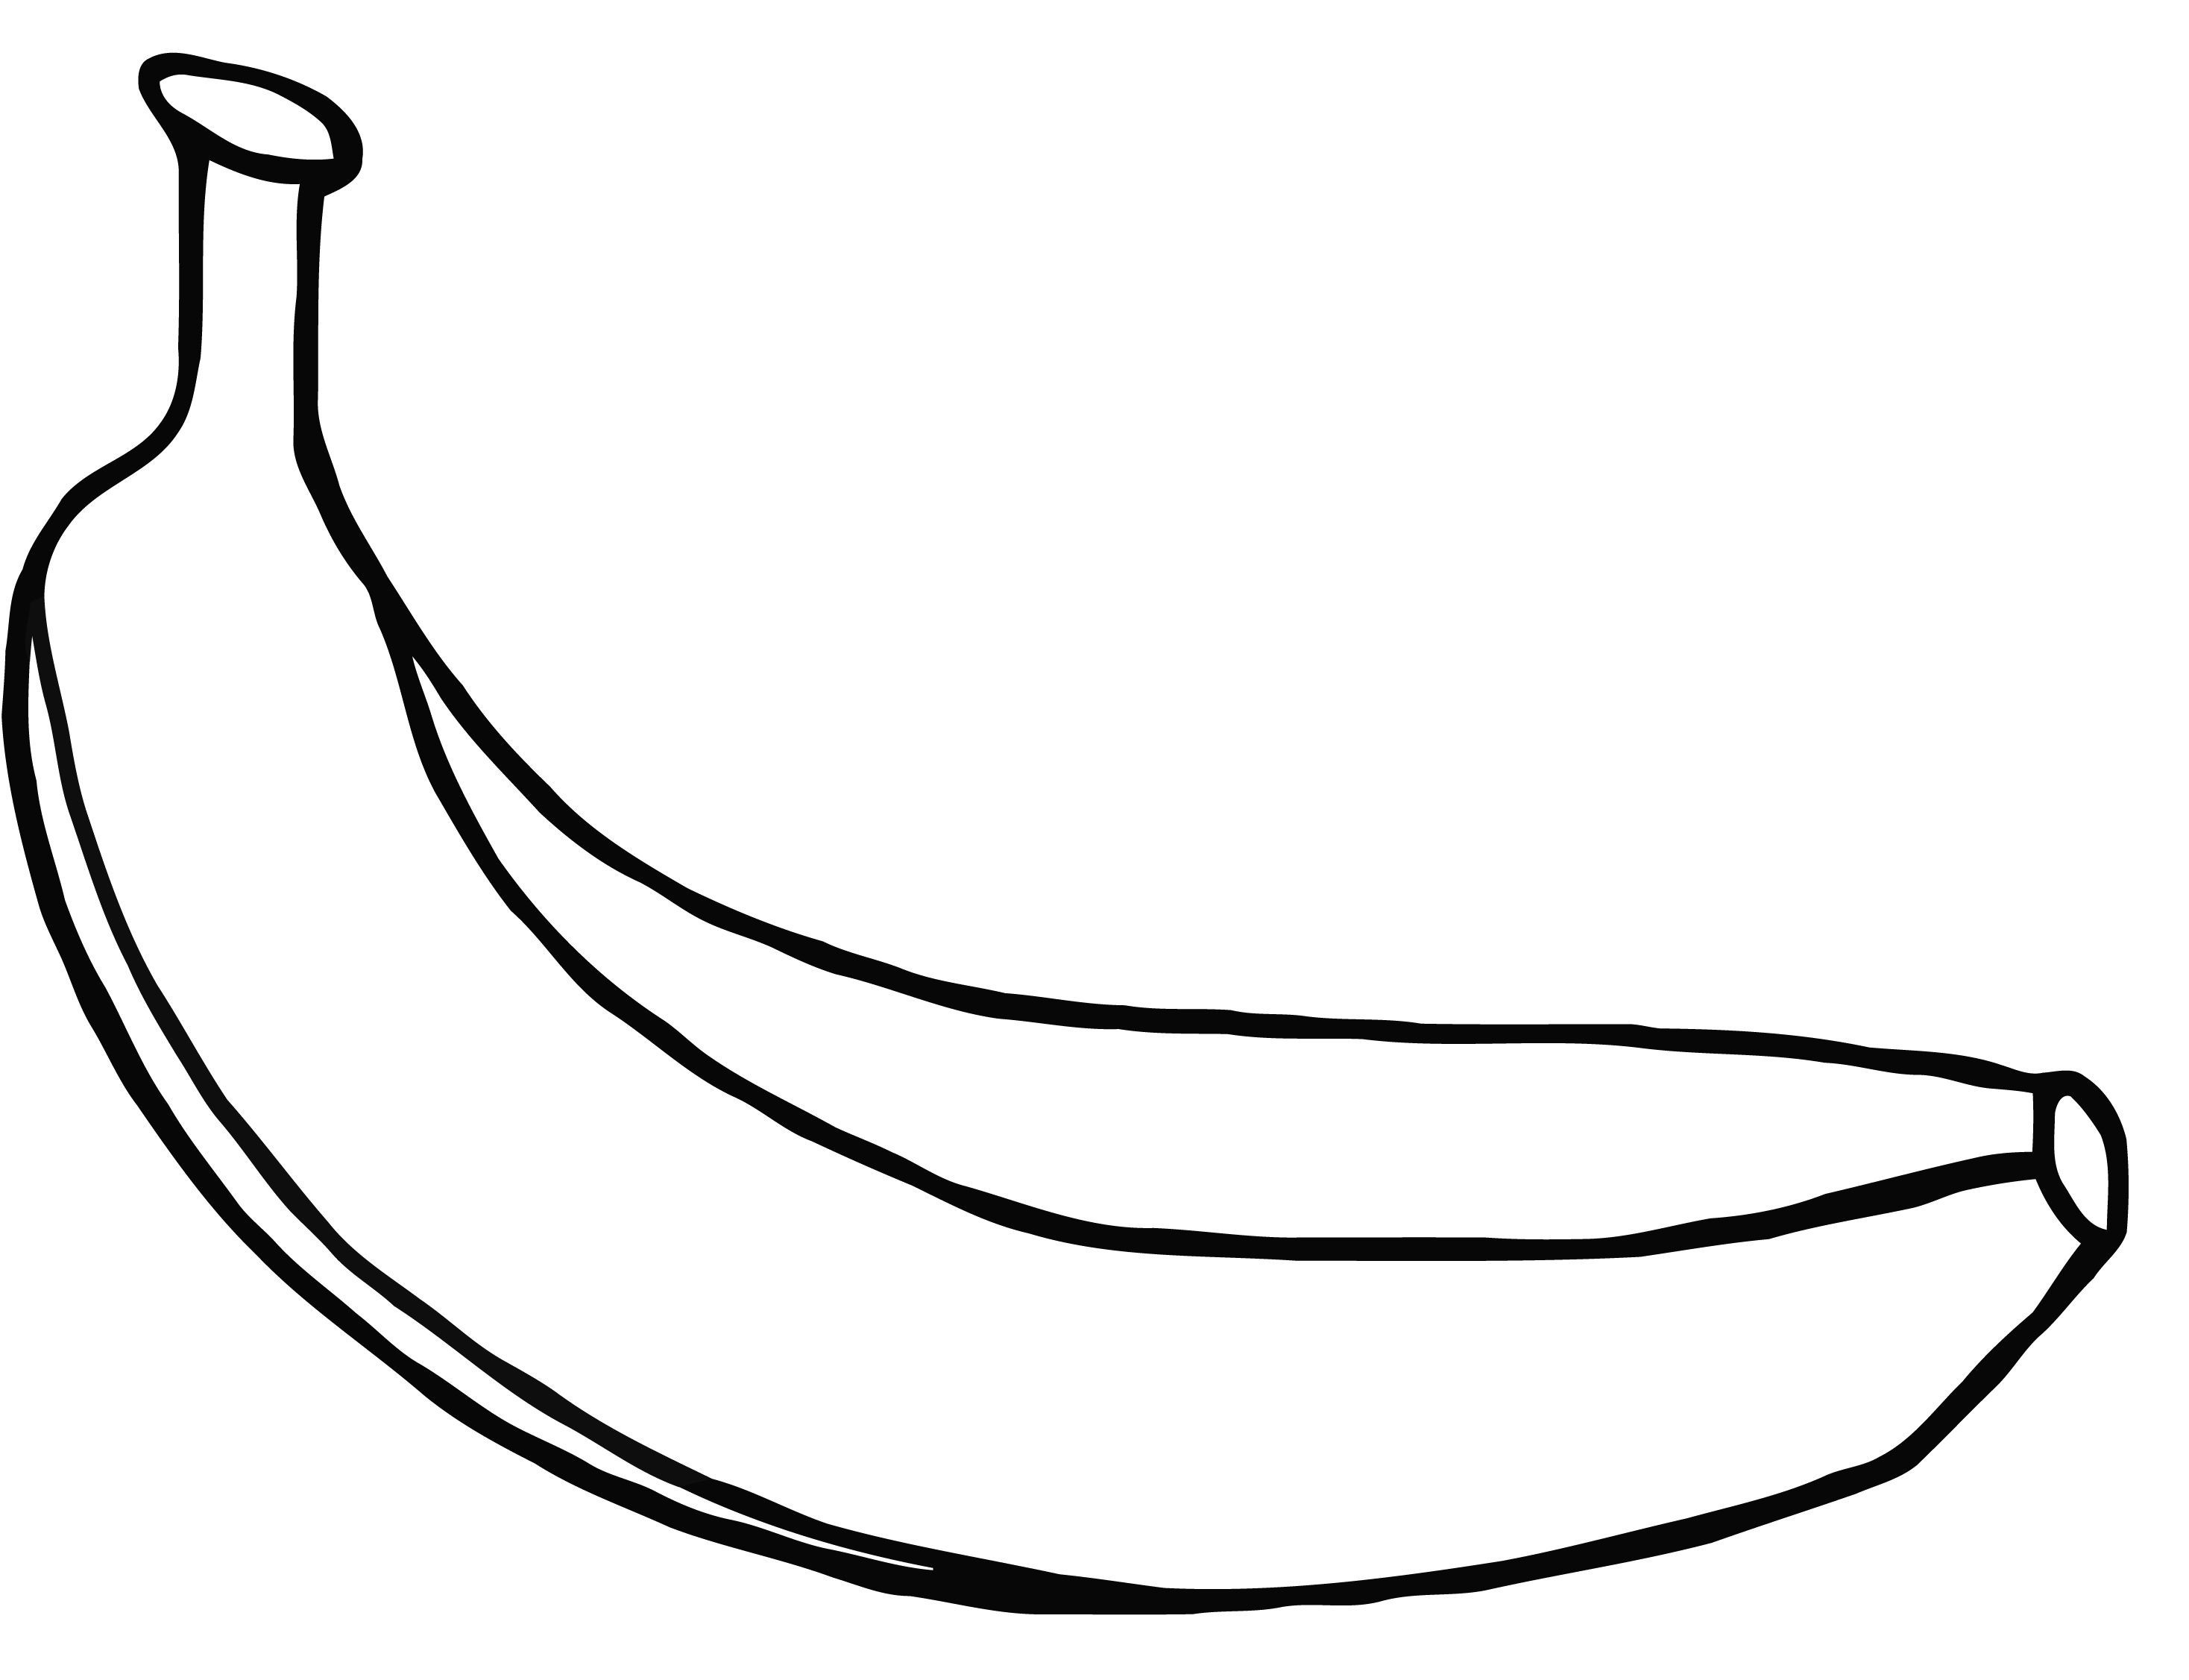 Banana Coloring Pages
 Free Printable Fruit Coloring Pages For Kids